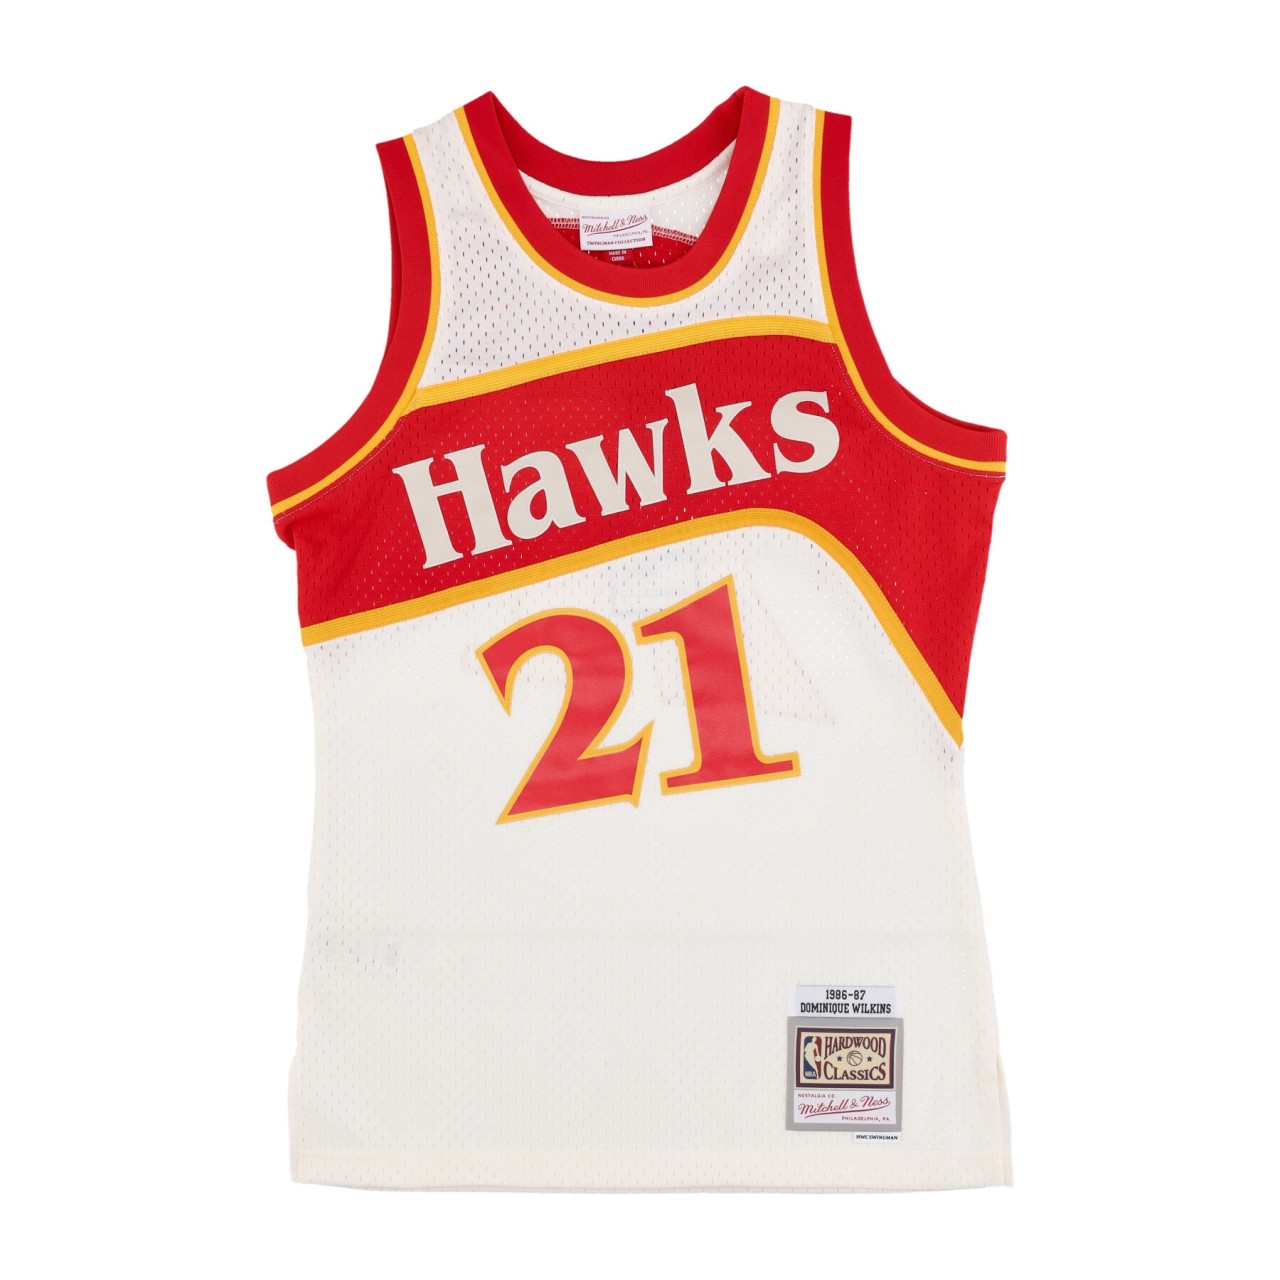 MITCHELL & NESS NBA OFF WHITE TEAM COLOR SWINGMAN JERSEY HARDWOOD CLASSICS 1986 NO 21 DOMINIQUE WILKINS ATLHAW TFSM5052-AHA86DWIOFWH